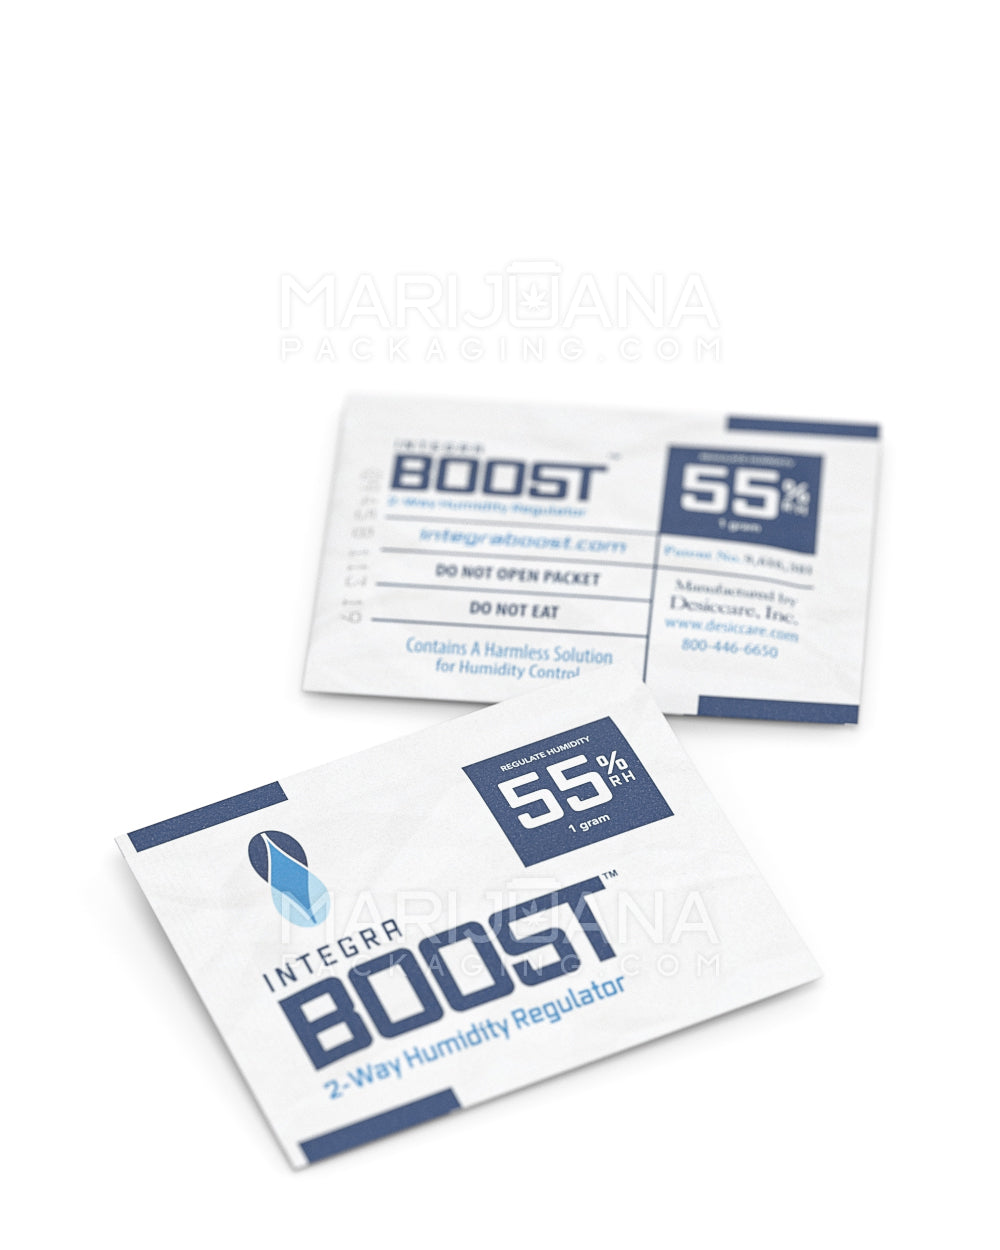 INTEGRA | Boost Humidity Pack | 1 Gram - 55% - 100 Count - 5